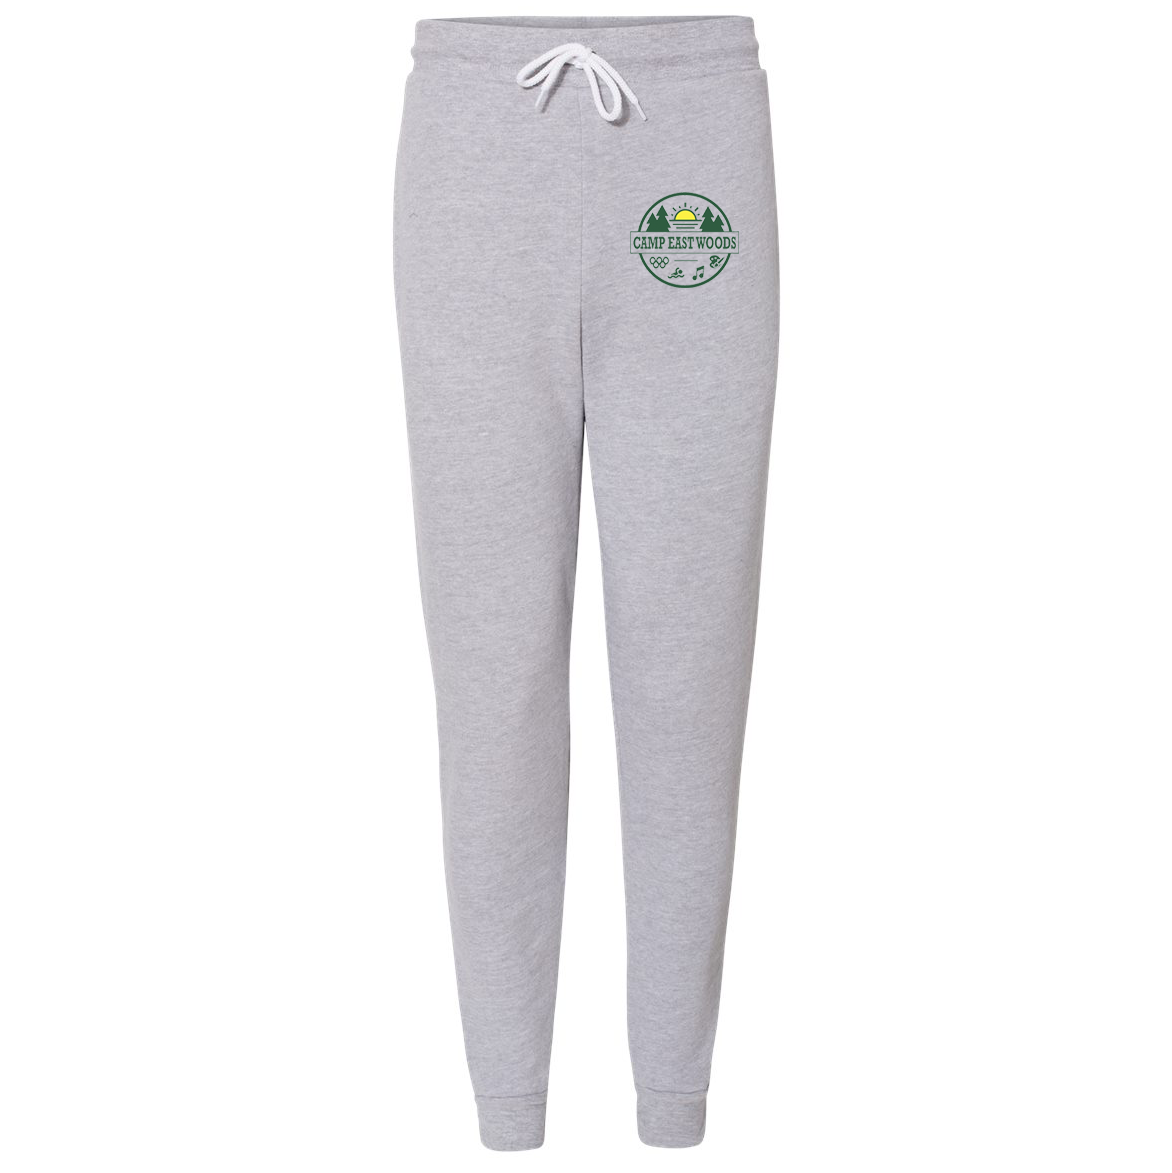 Camp East Woods Joggers